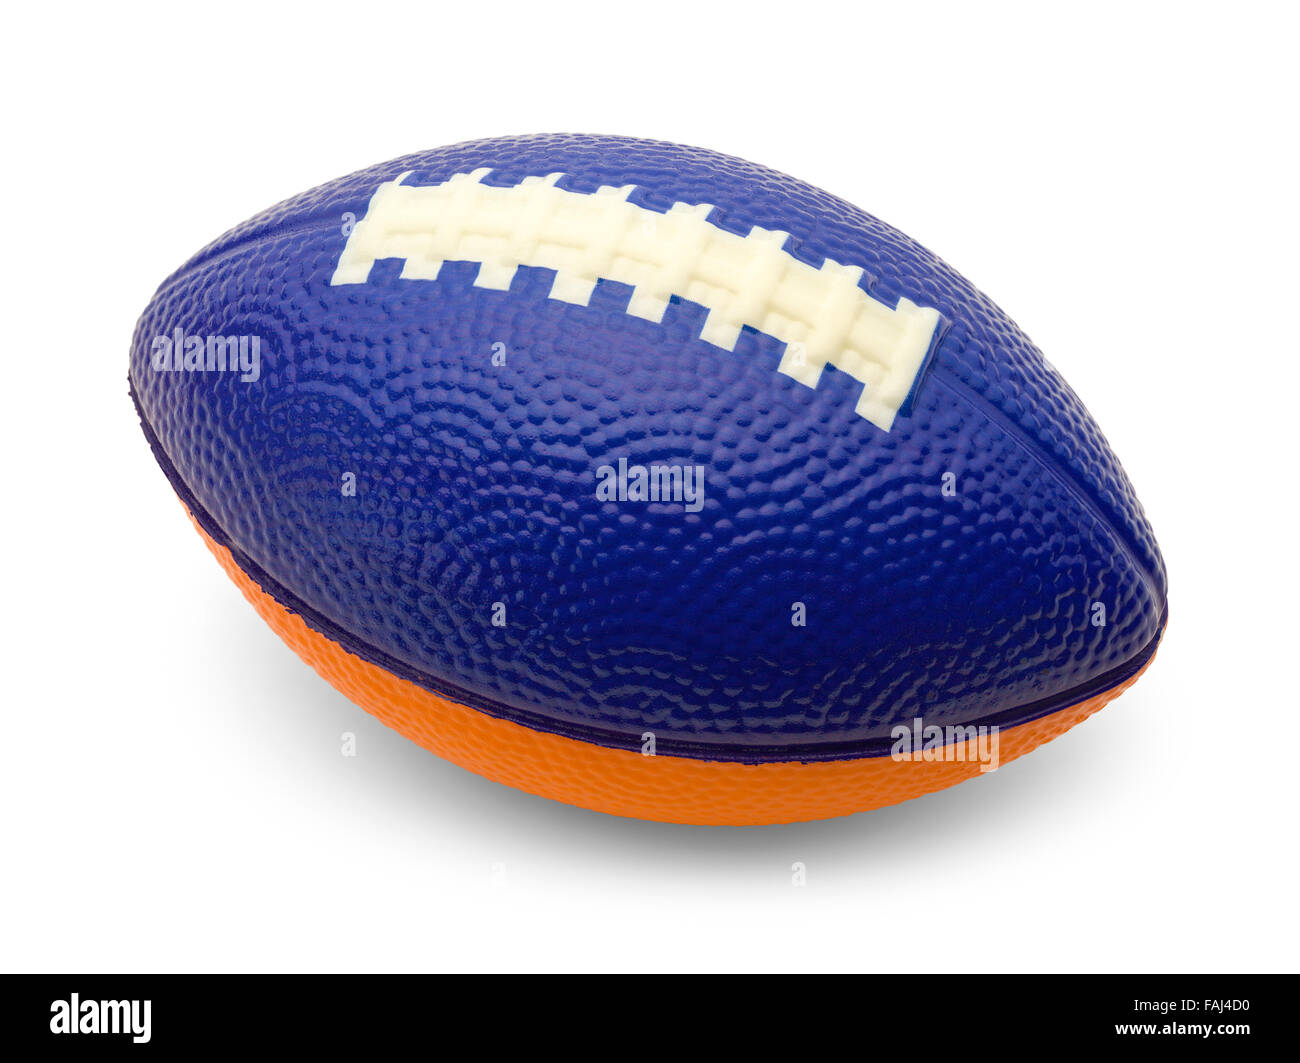 Kids Toy Foam Football Isolated on a White Background. Stock Photo